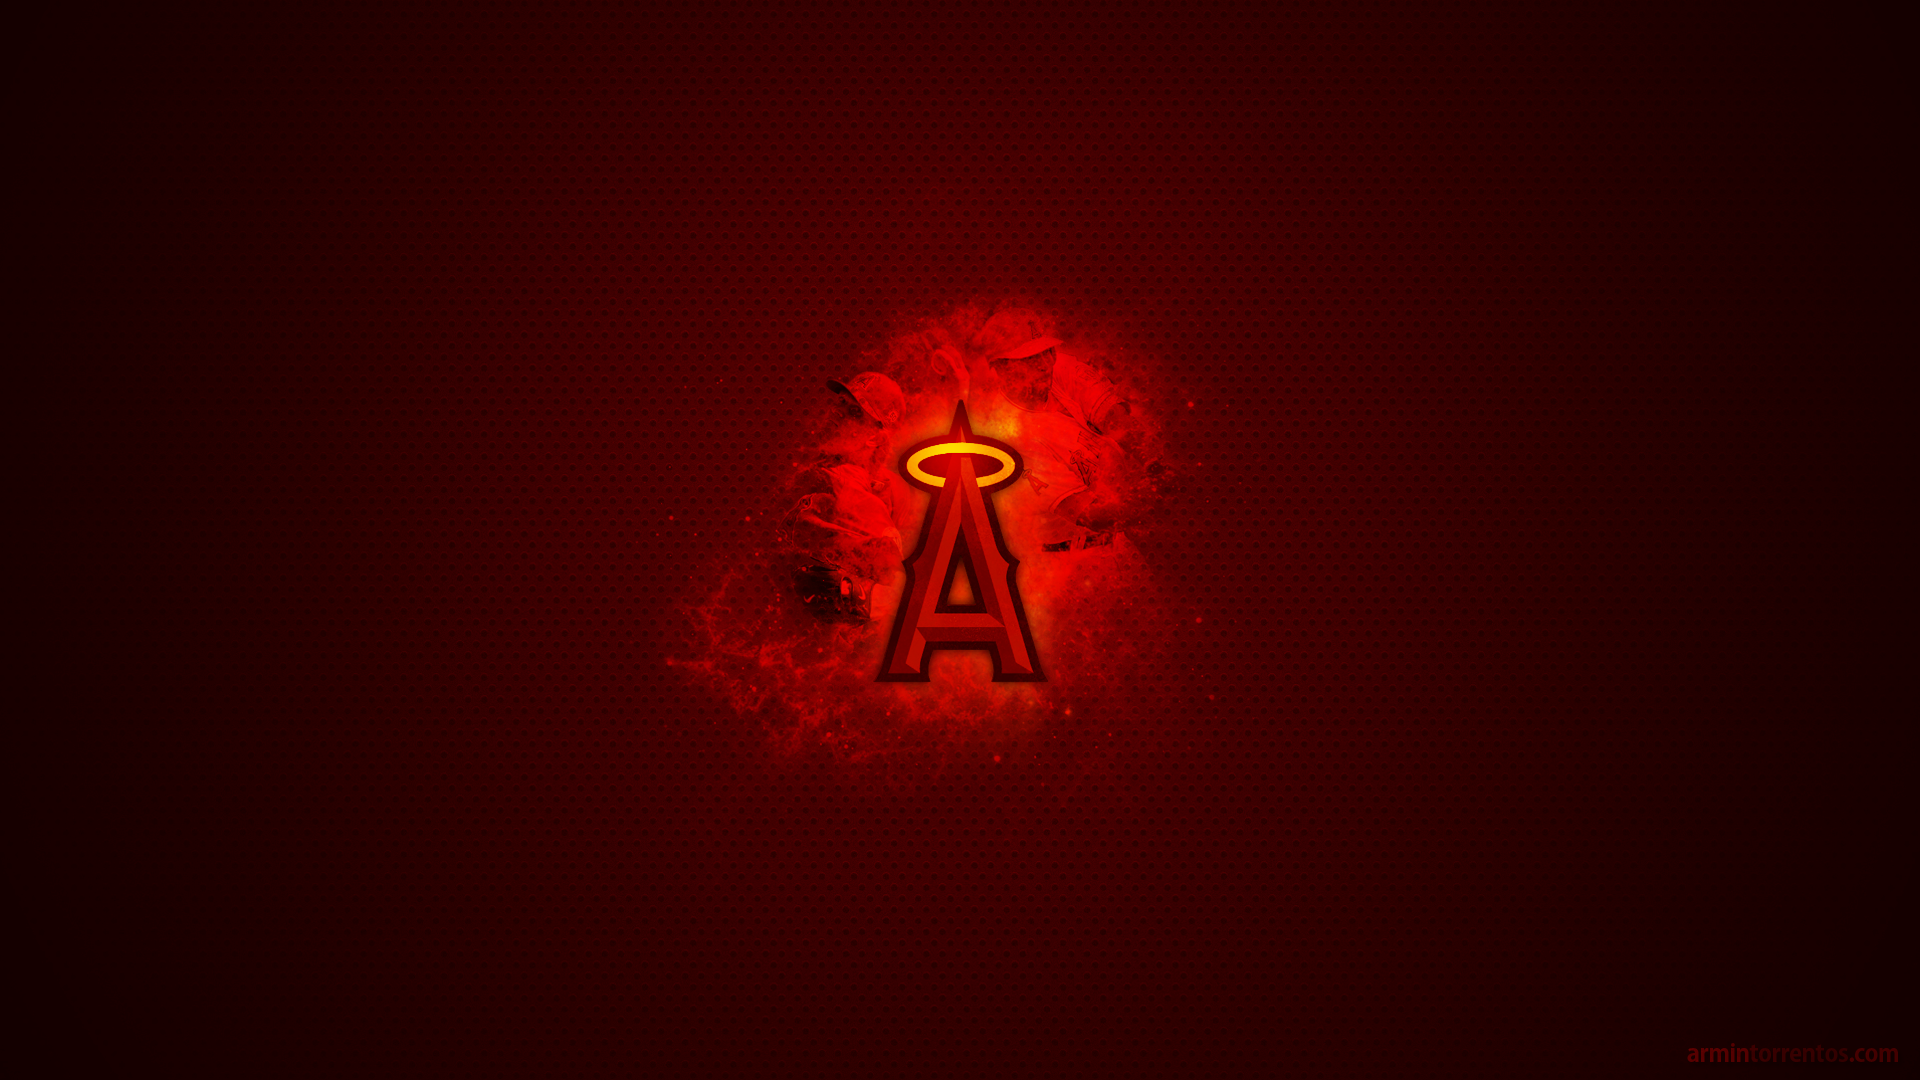 Angels Iphone Wallpapers